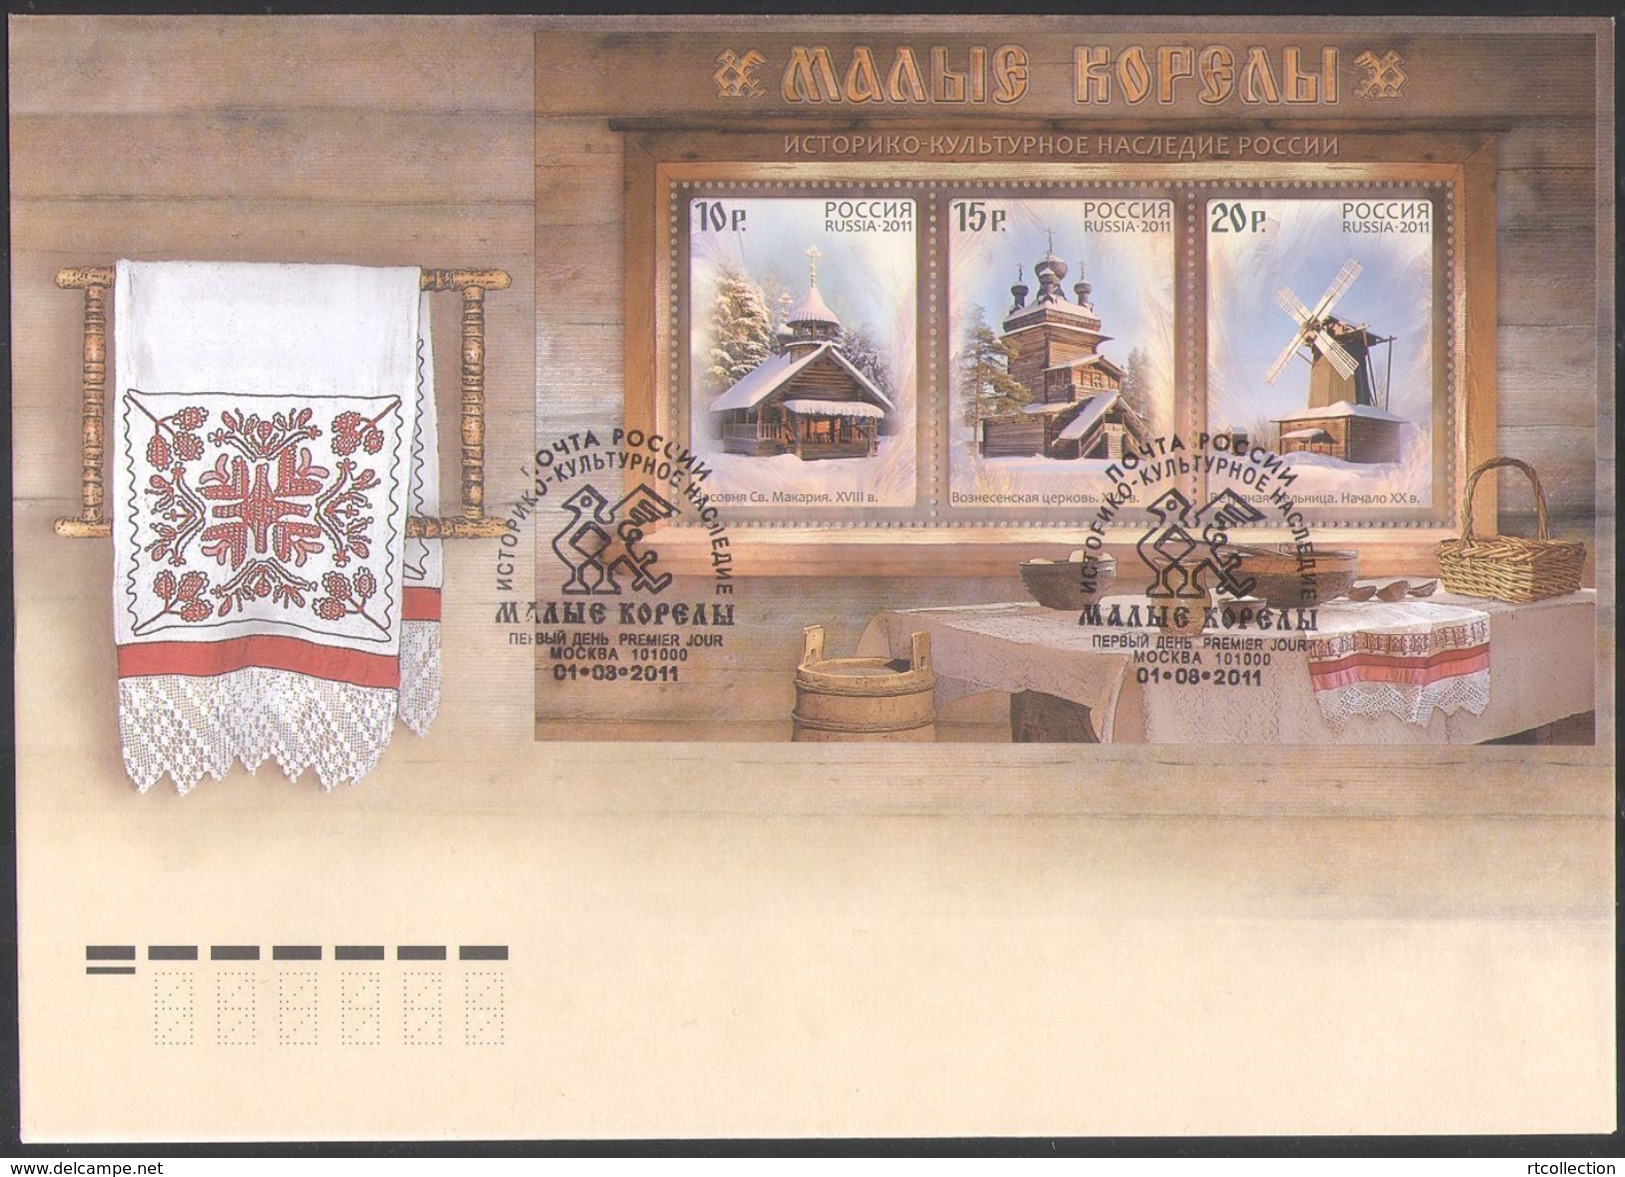 Russia 2011 Souvenir Pack Booklet FDC Museum Wooden Architecture Folk Art Malye Korely Historical Culture Heritage Stamp - FDC